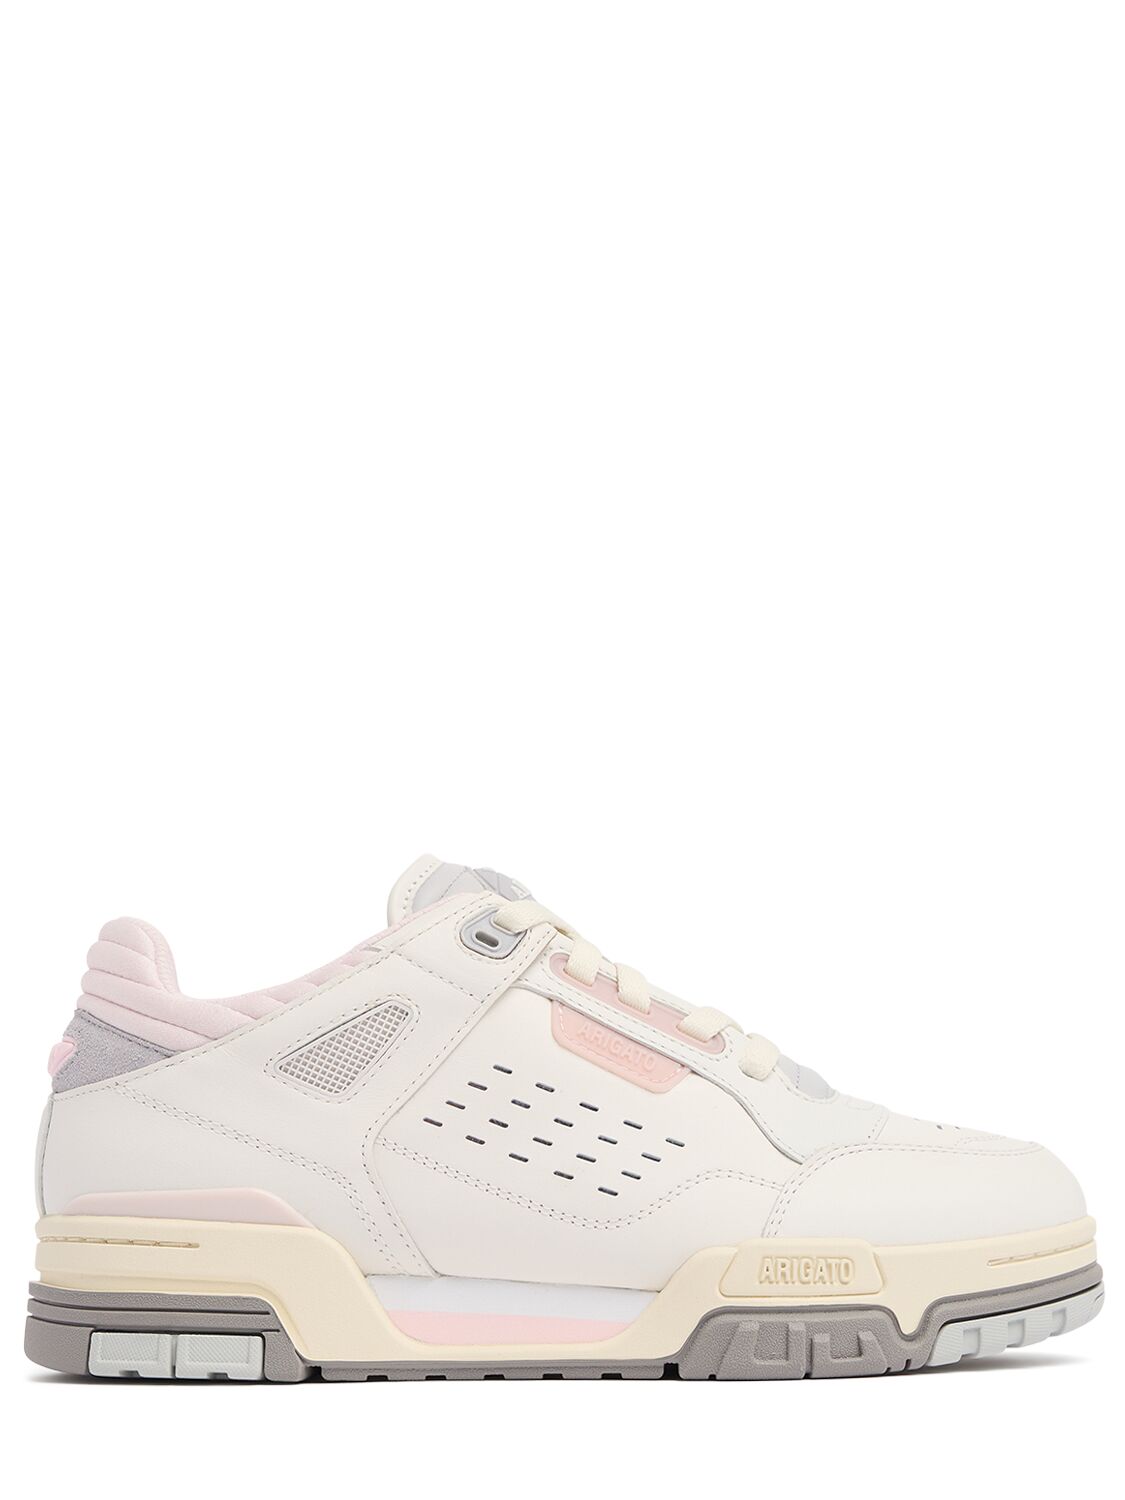 Axel Arigato 34mm Onyx Sneakers In White,pink